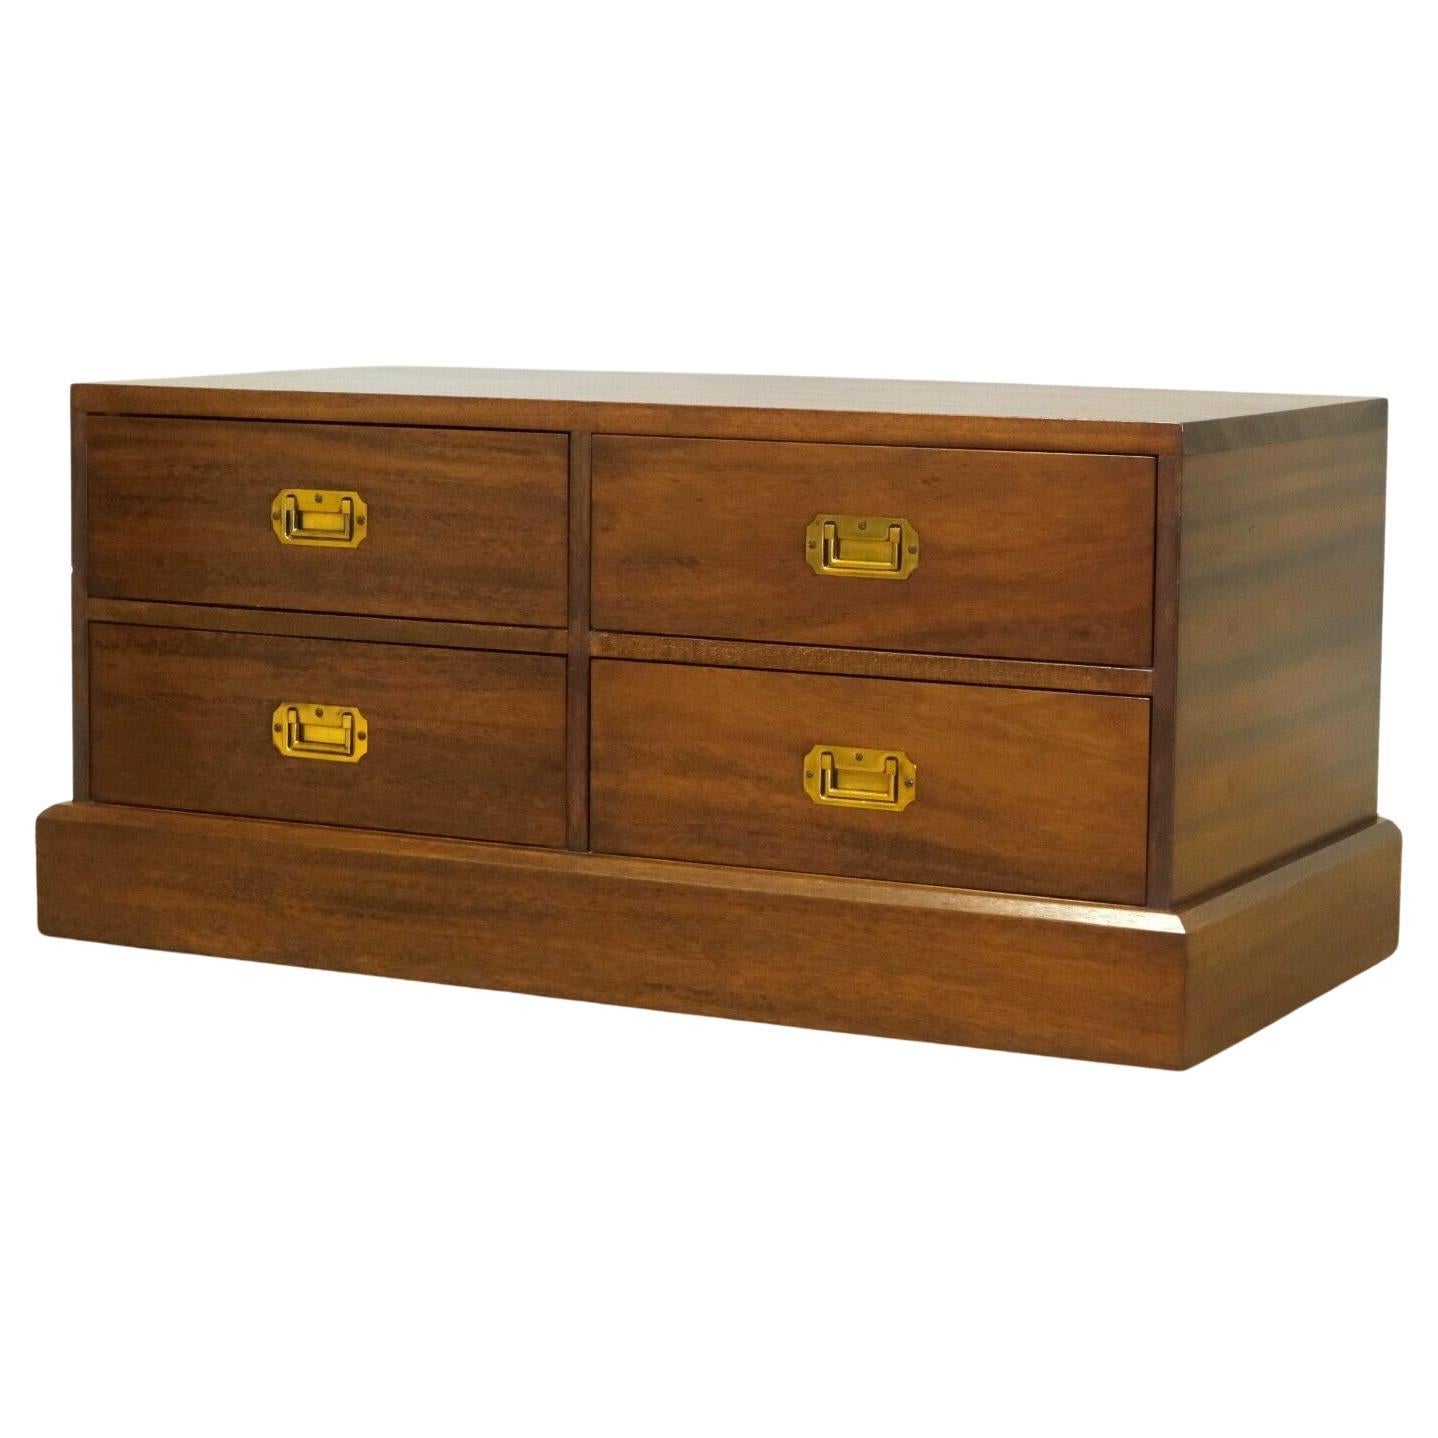 MiLITARY CAMPAIGN STYLE BROWN MAHOGANY CHEST/TV STAND